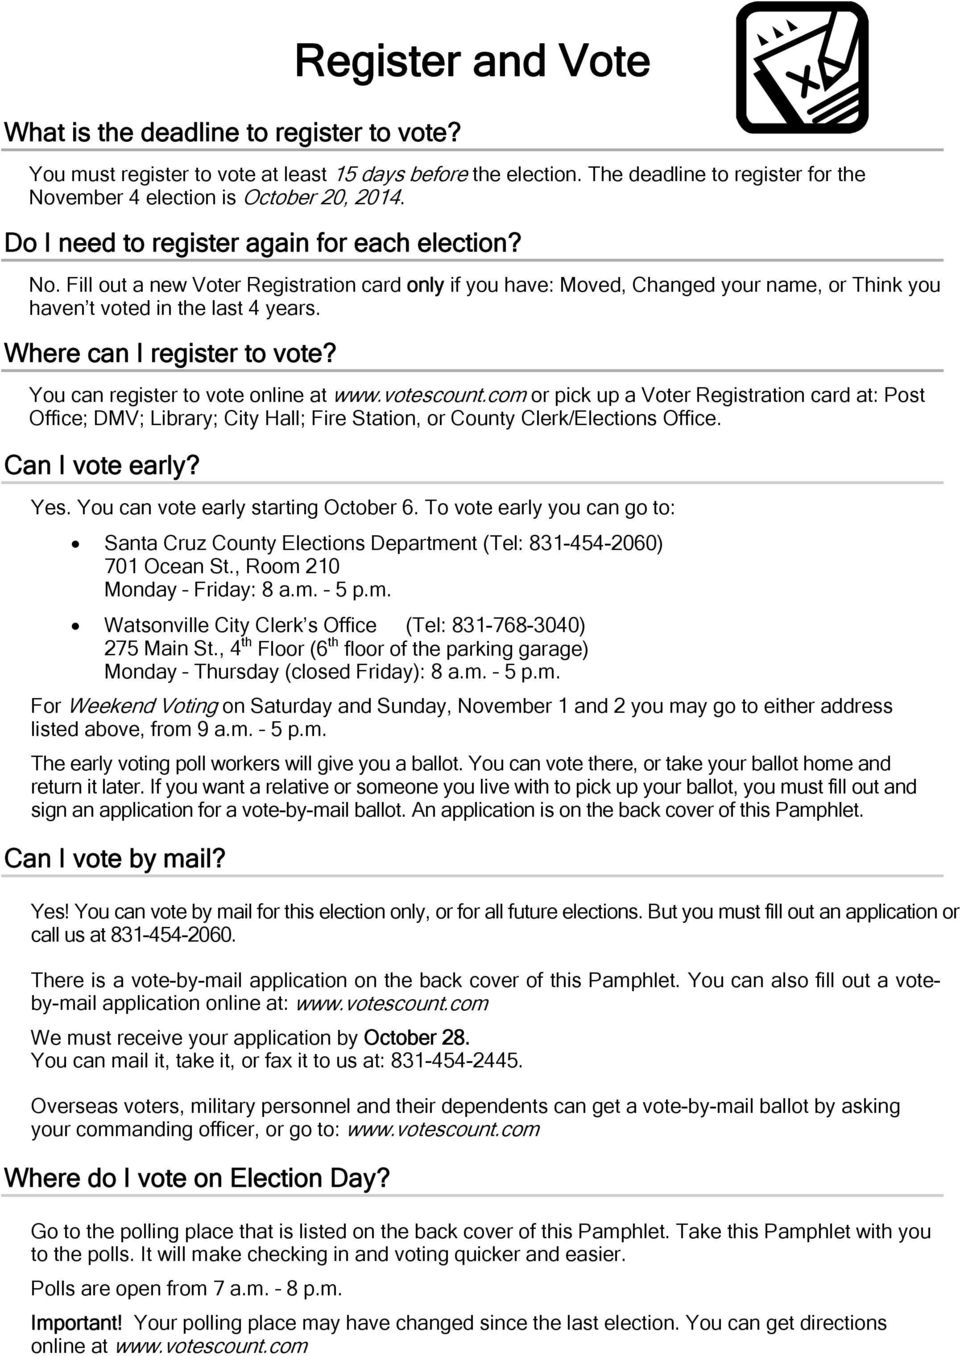 Where can I register to vote? You can register to vote online at www.votescount.